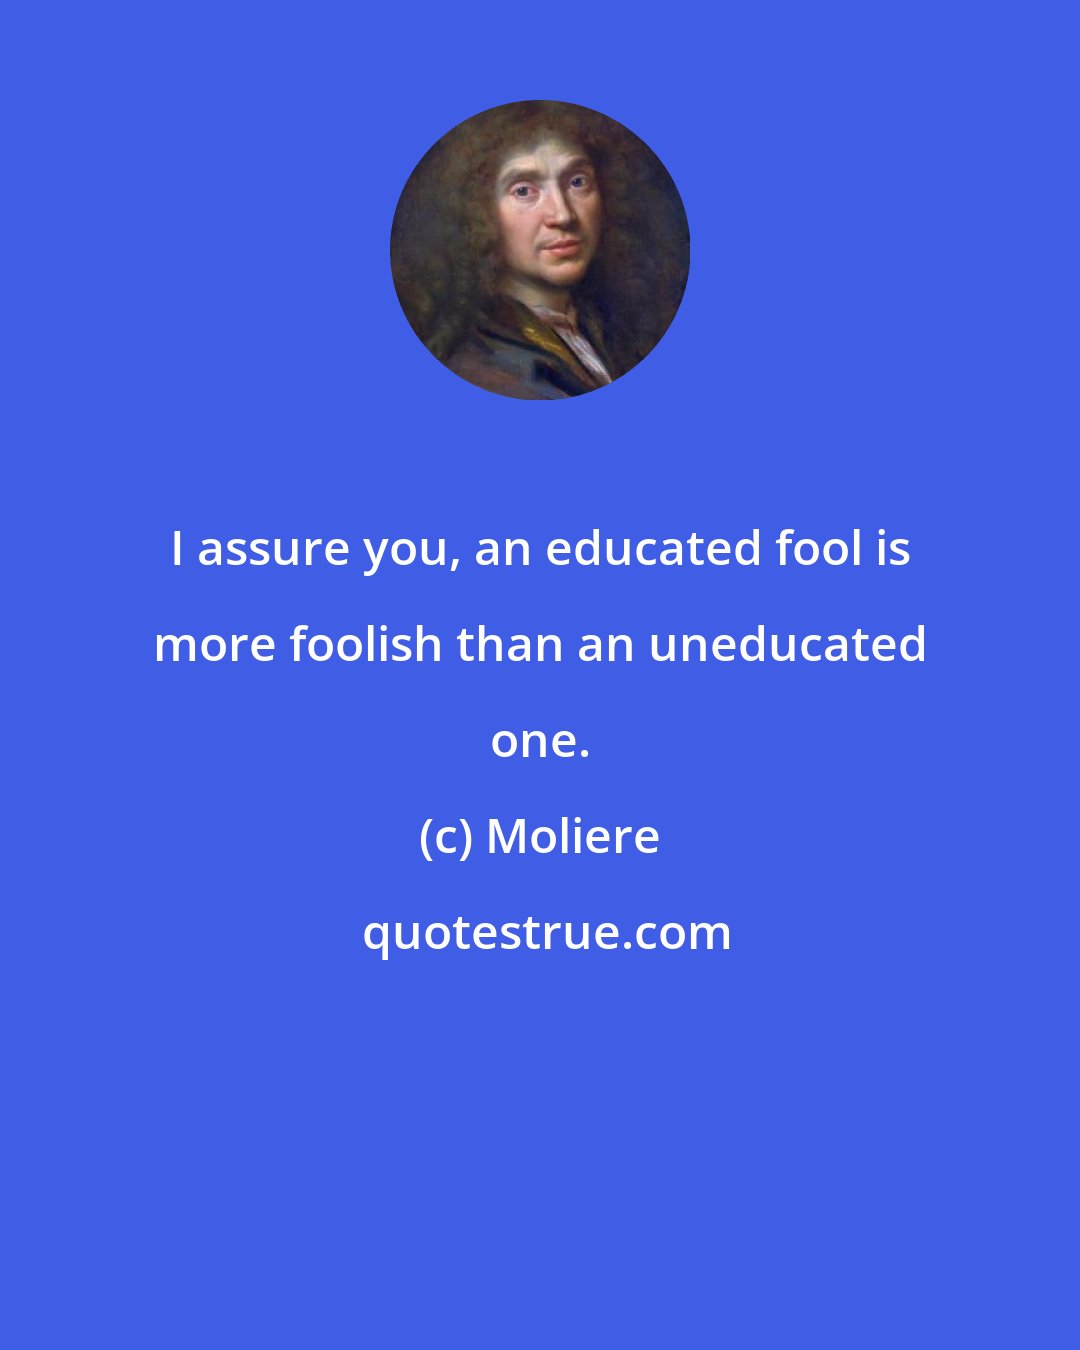 Moliere: I assure you, an educated fool is more foolish than an uneducated one.